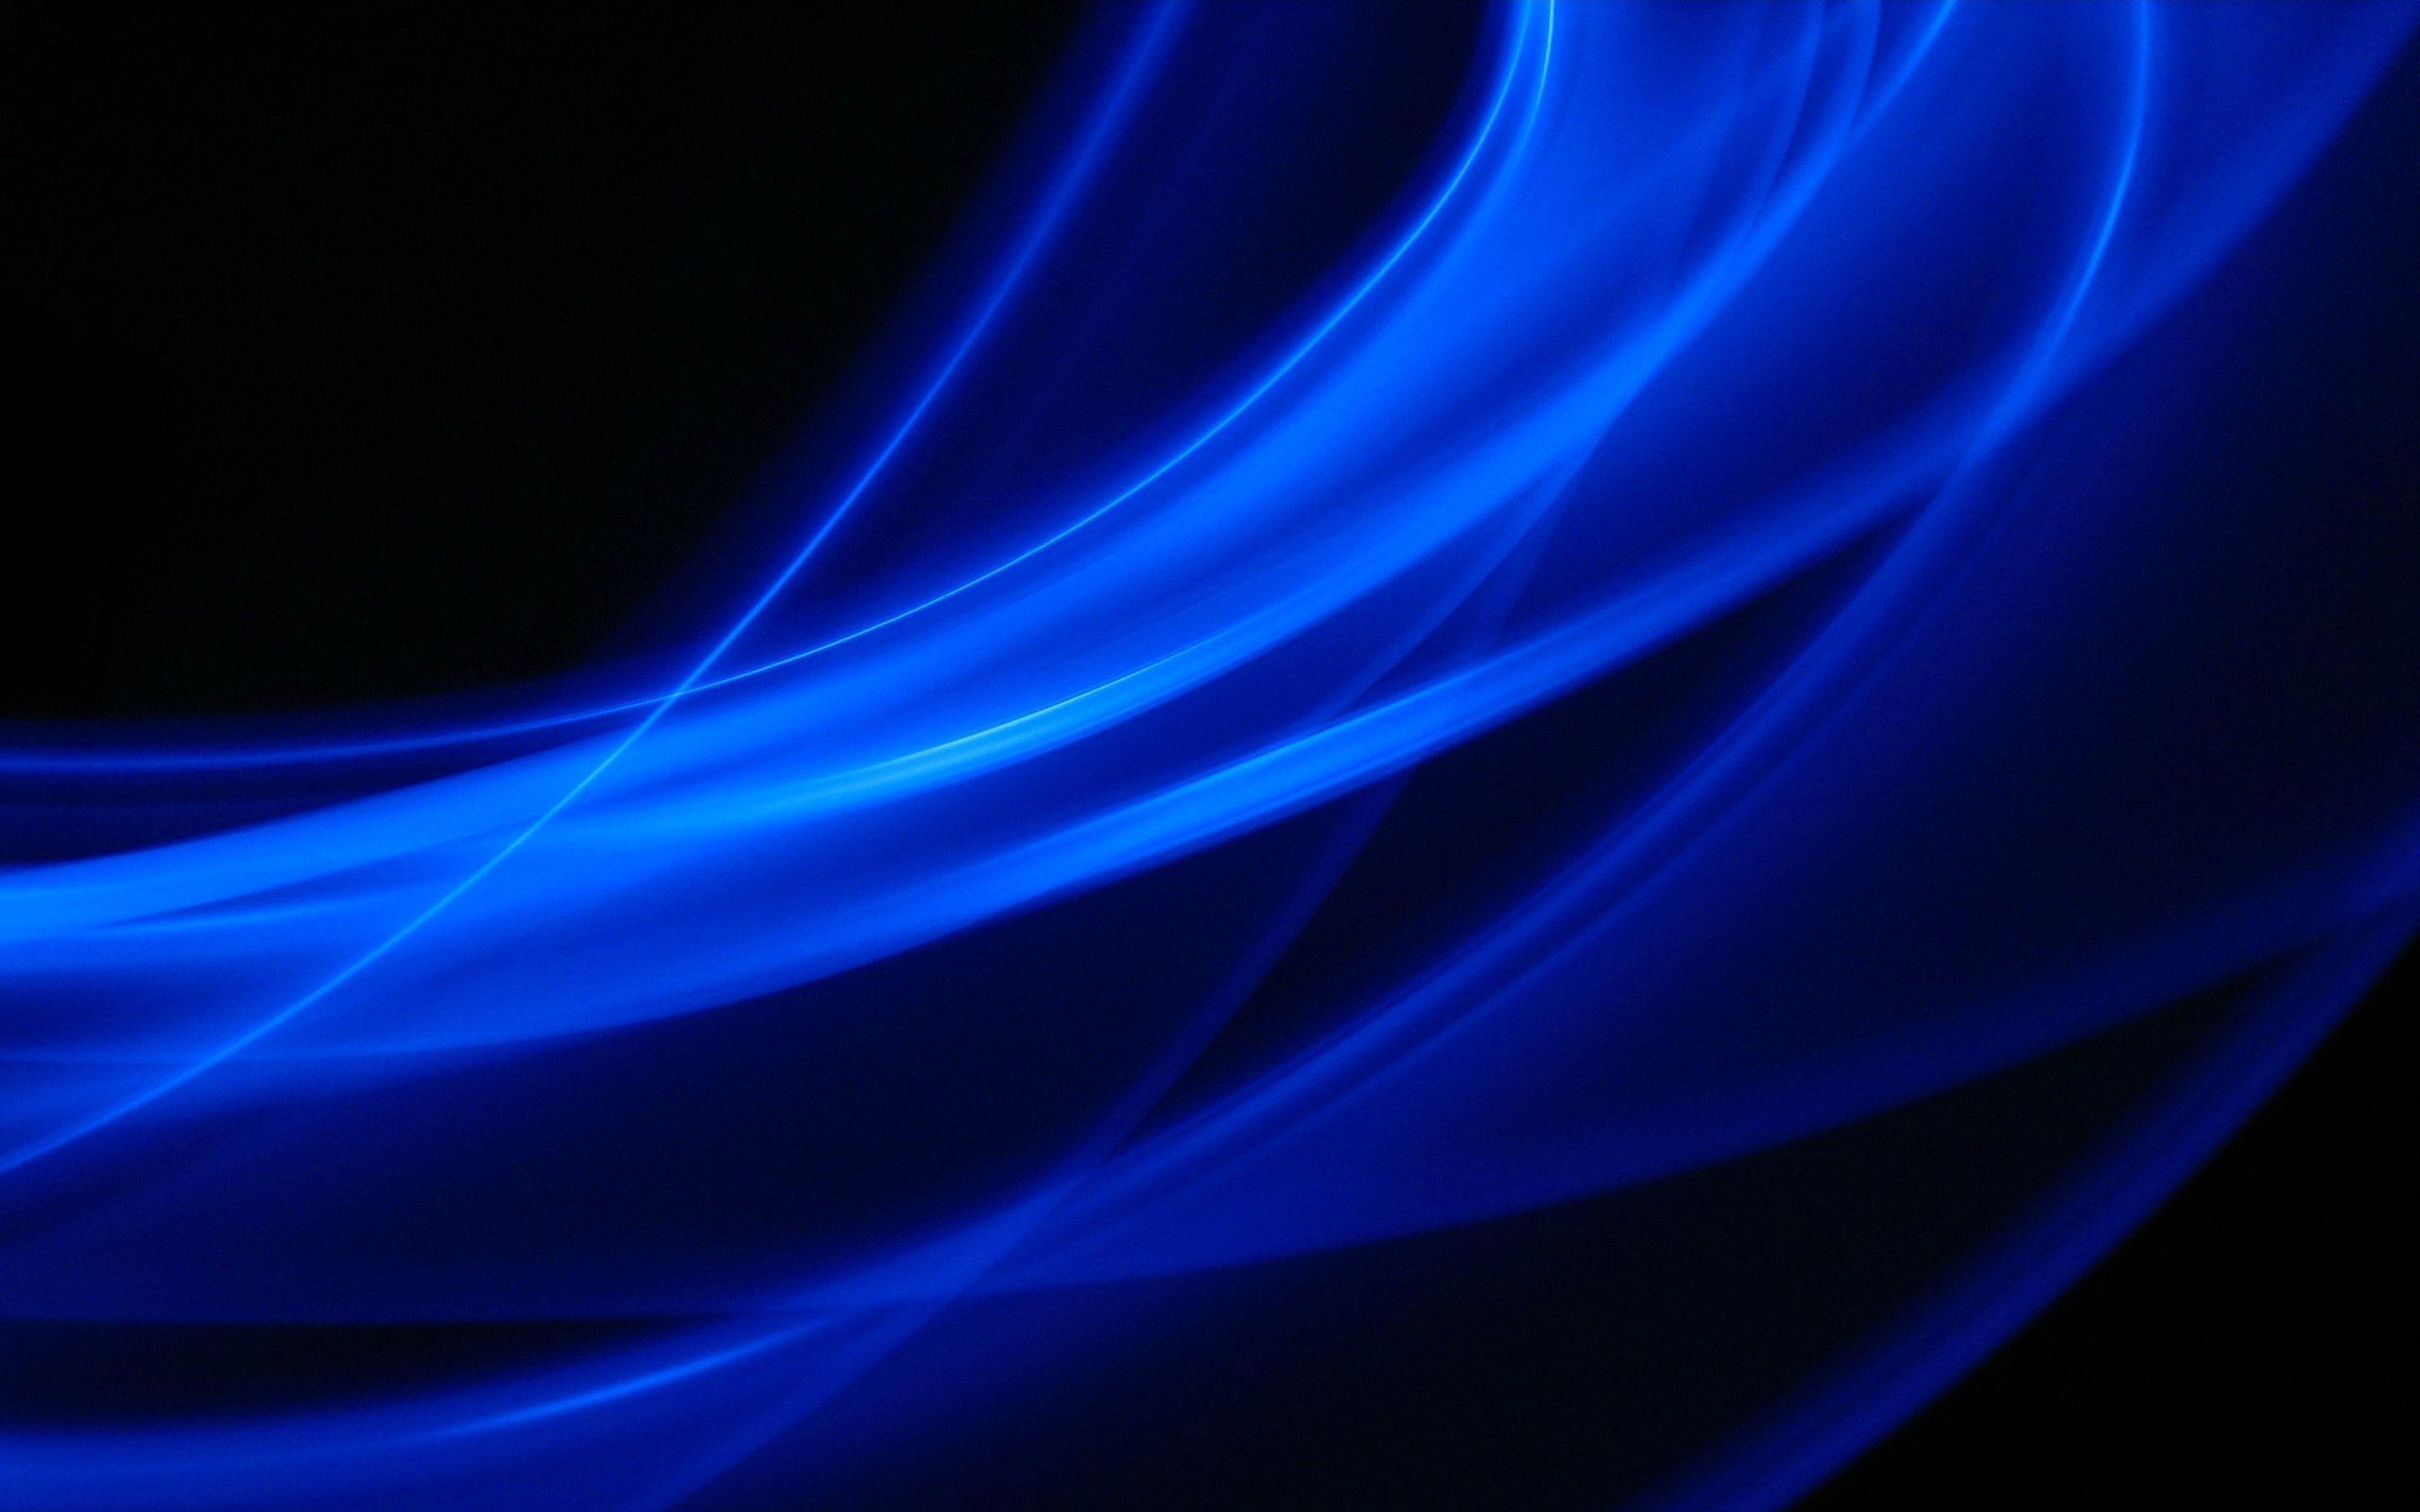 Dark Blue Abstract Wallpapers 2560x1600